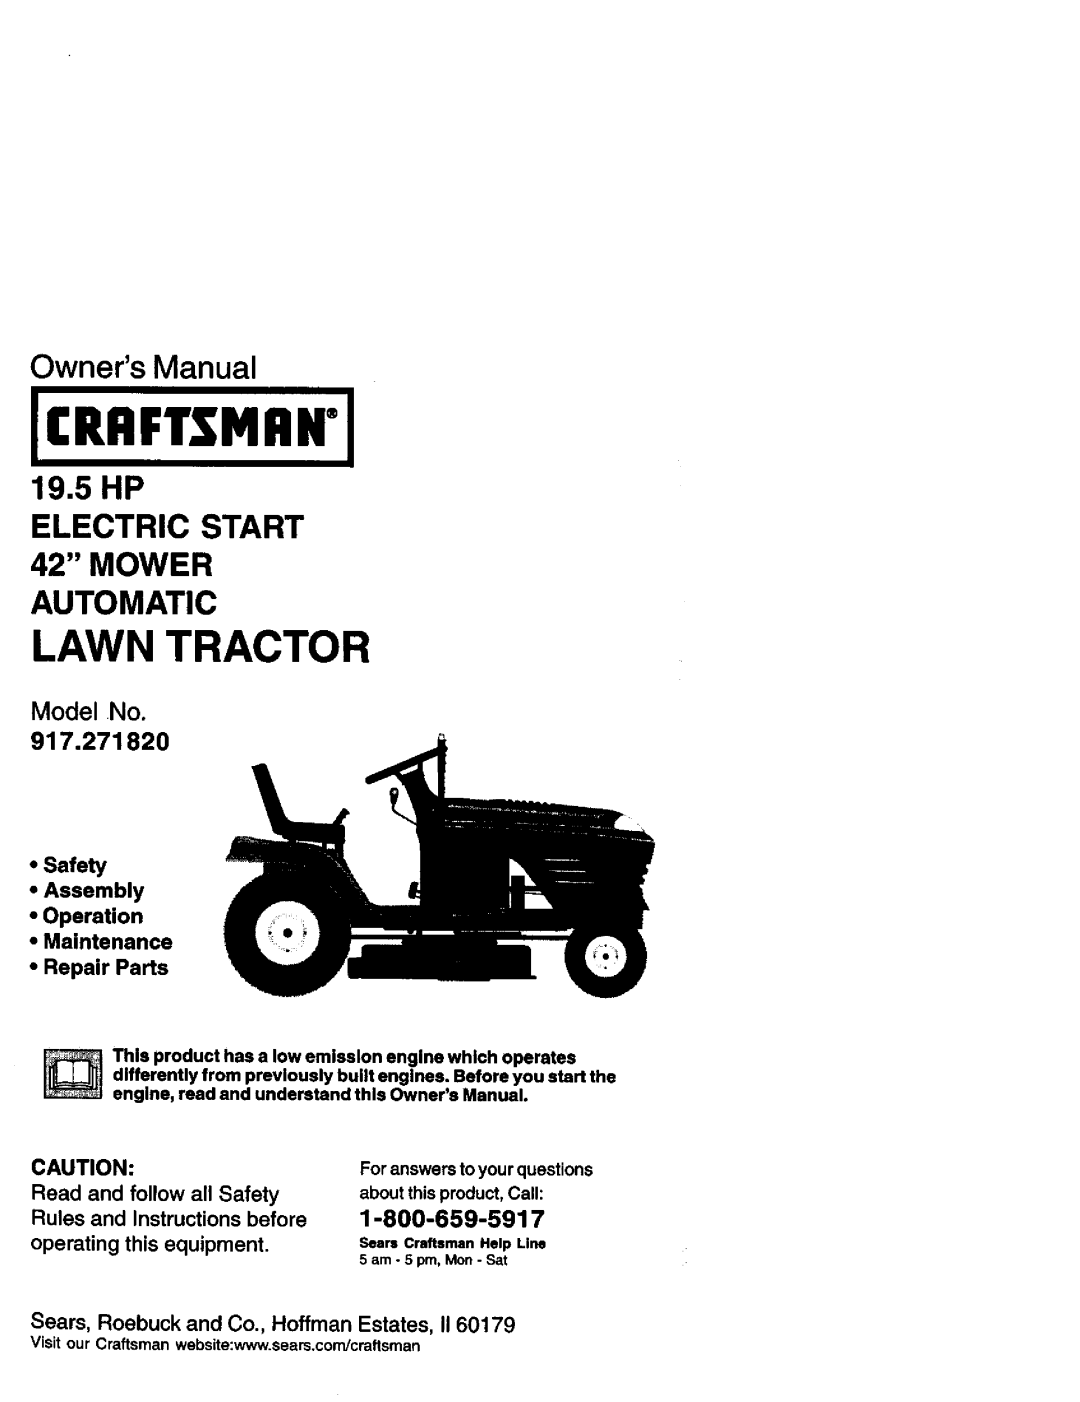 Craftsman 917.27182 manual Owners Manual, 1-800-659-5917, •Safety •Assembly •Operation •Maintenance, •Repair Parts 